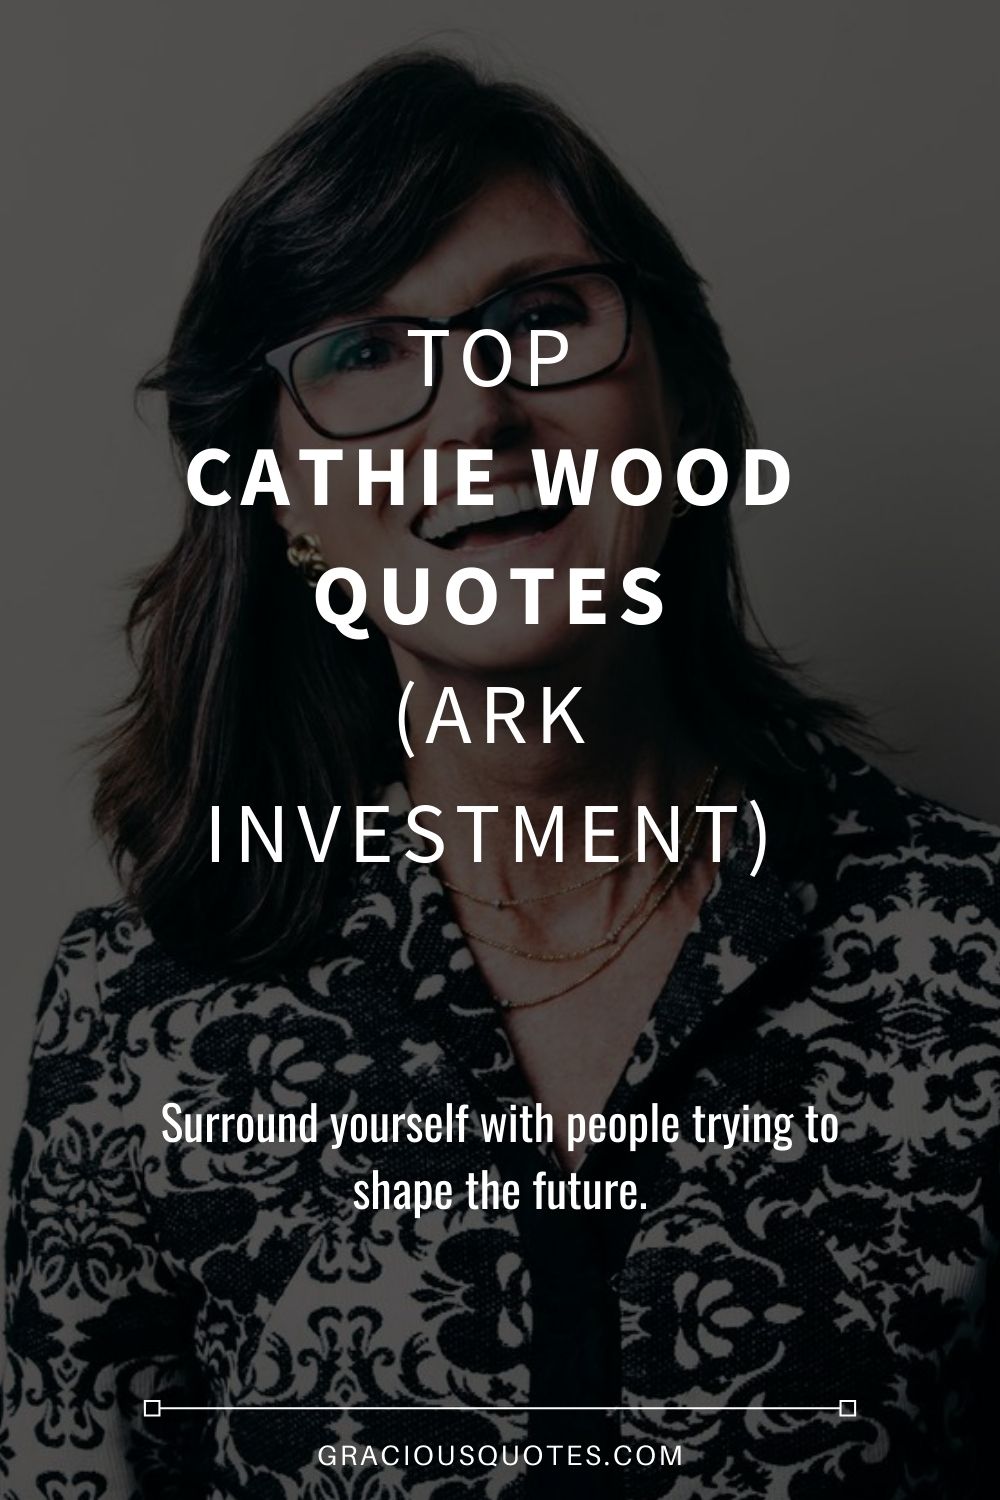 Top Cathie Wood Quotes (ARK INVESTMENT) - Gracious Quotes